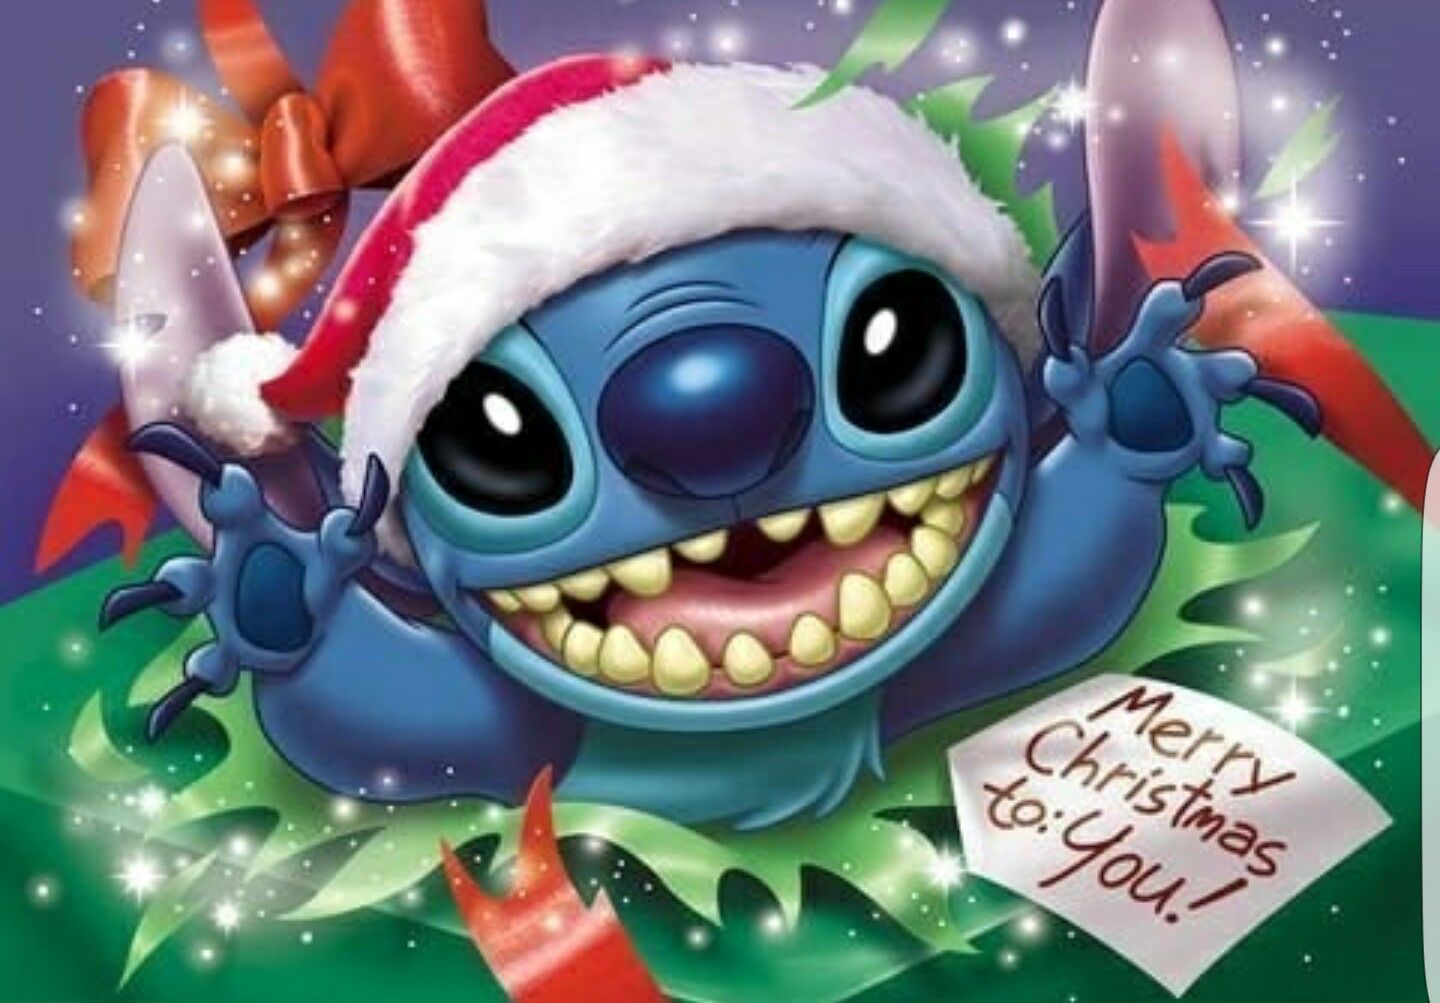 Download Disney Christmas iPhone Stitch And Scrump Wallpaper  Wallpapers com